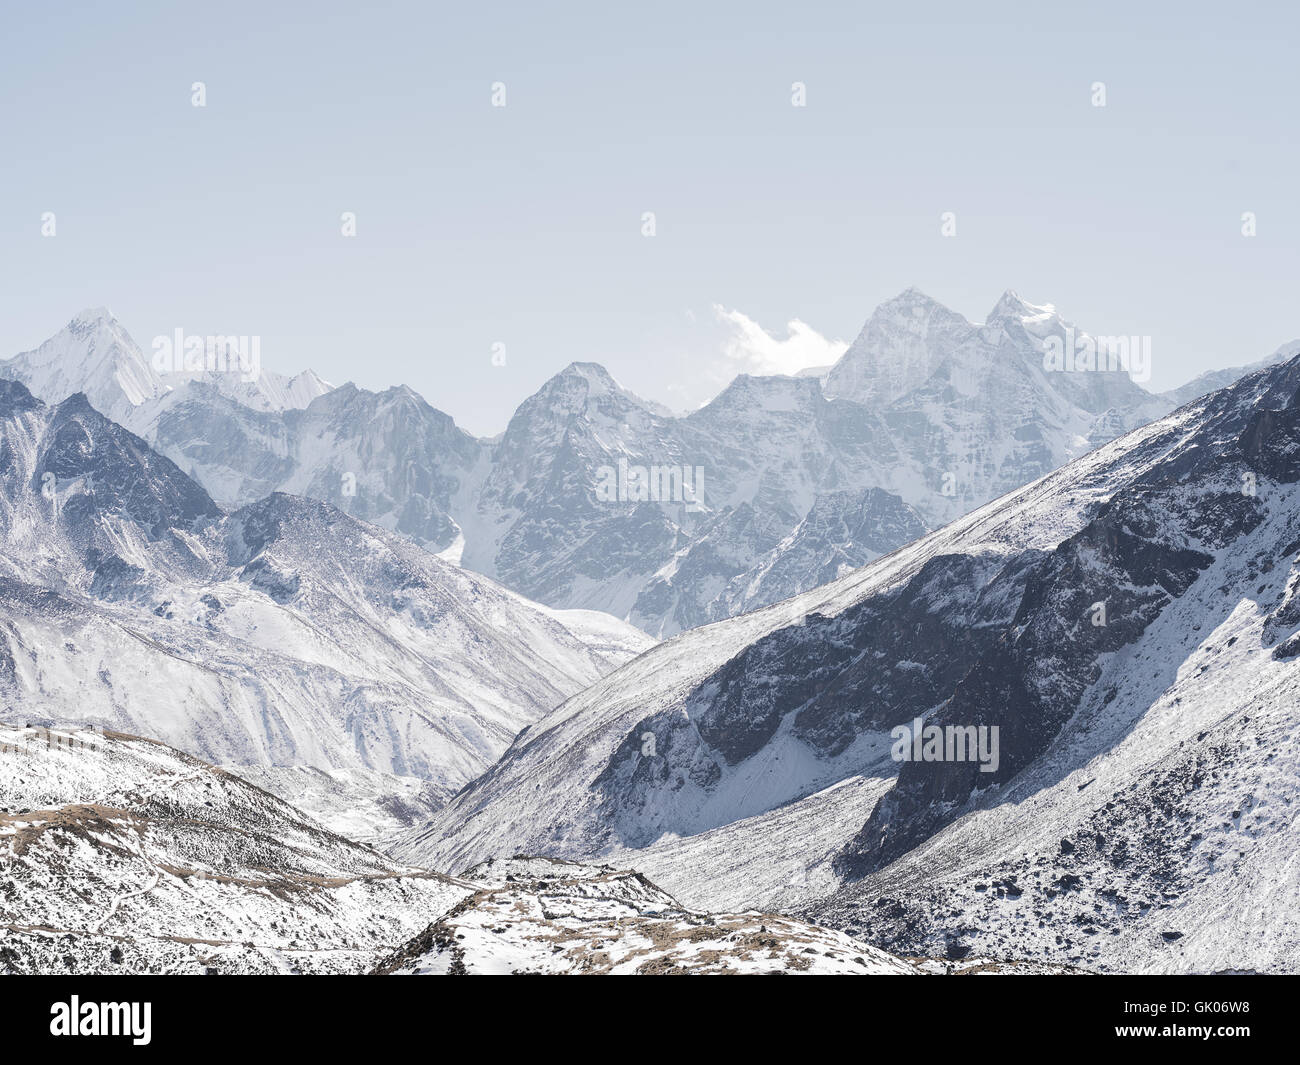 Snow covered mountain landscape near Lobuche, Nepal as seen from the Everest Base Camp trek Stock Photo